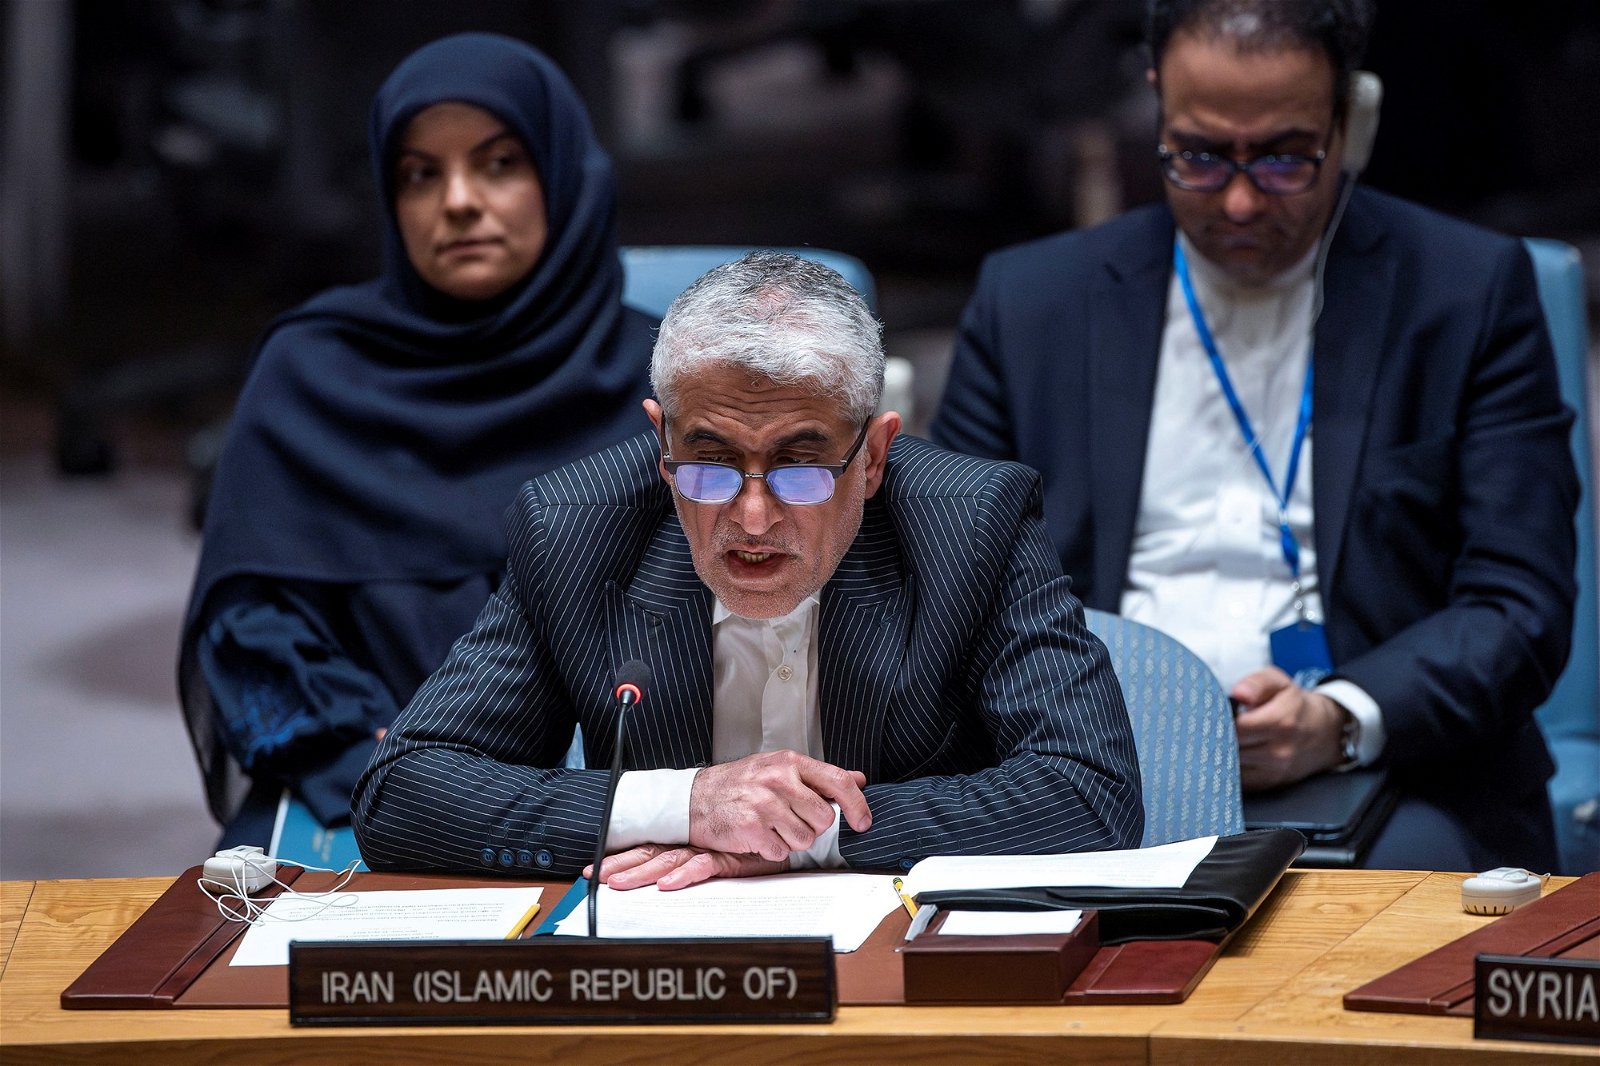 Amir Saeid Iravani sits at the Security Council desk and leans into the microphone